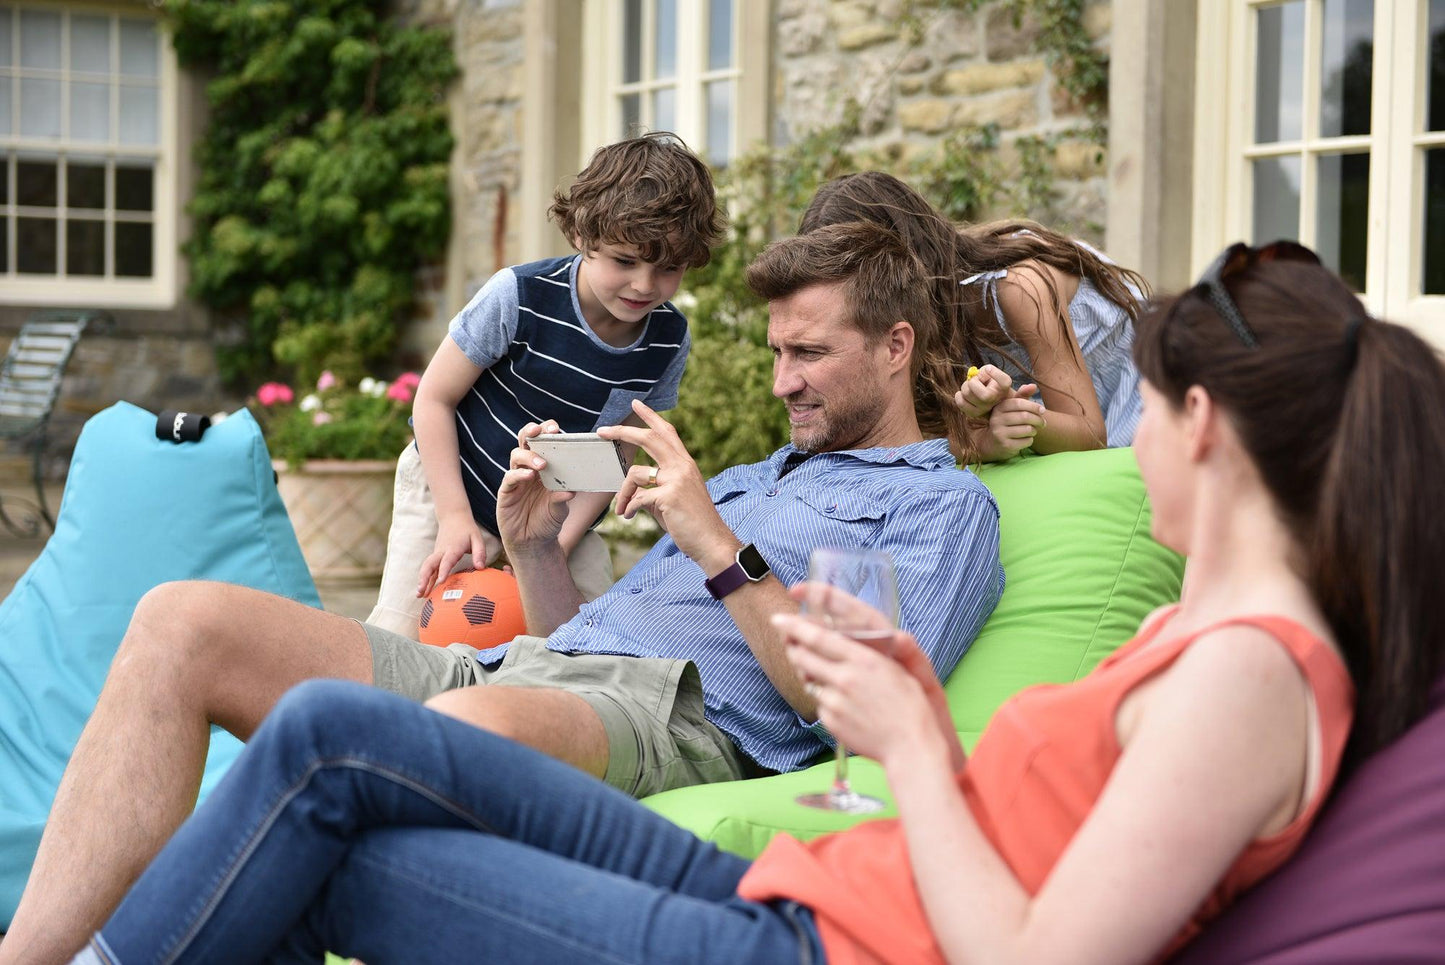 A man and a woman lounge on colorful Brisks Extreme Lounging B-Bag Mighty outside a rustic house. The man shows something on his smartphone to two children, while the woman holds a glass of wine and looks on. One child holds an orange ball, and the other stands beside the man.